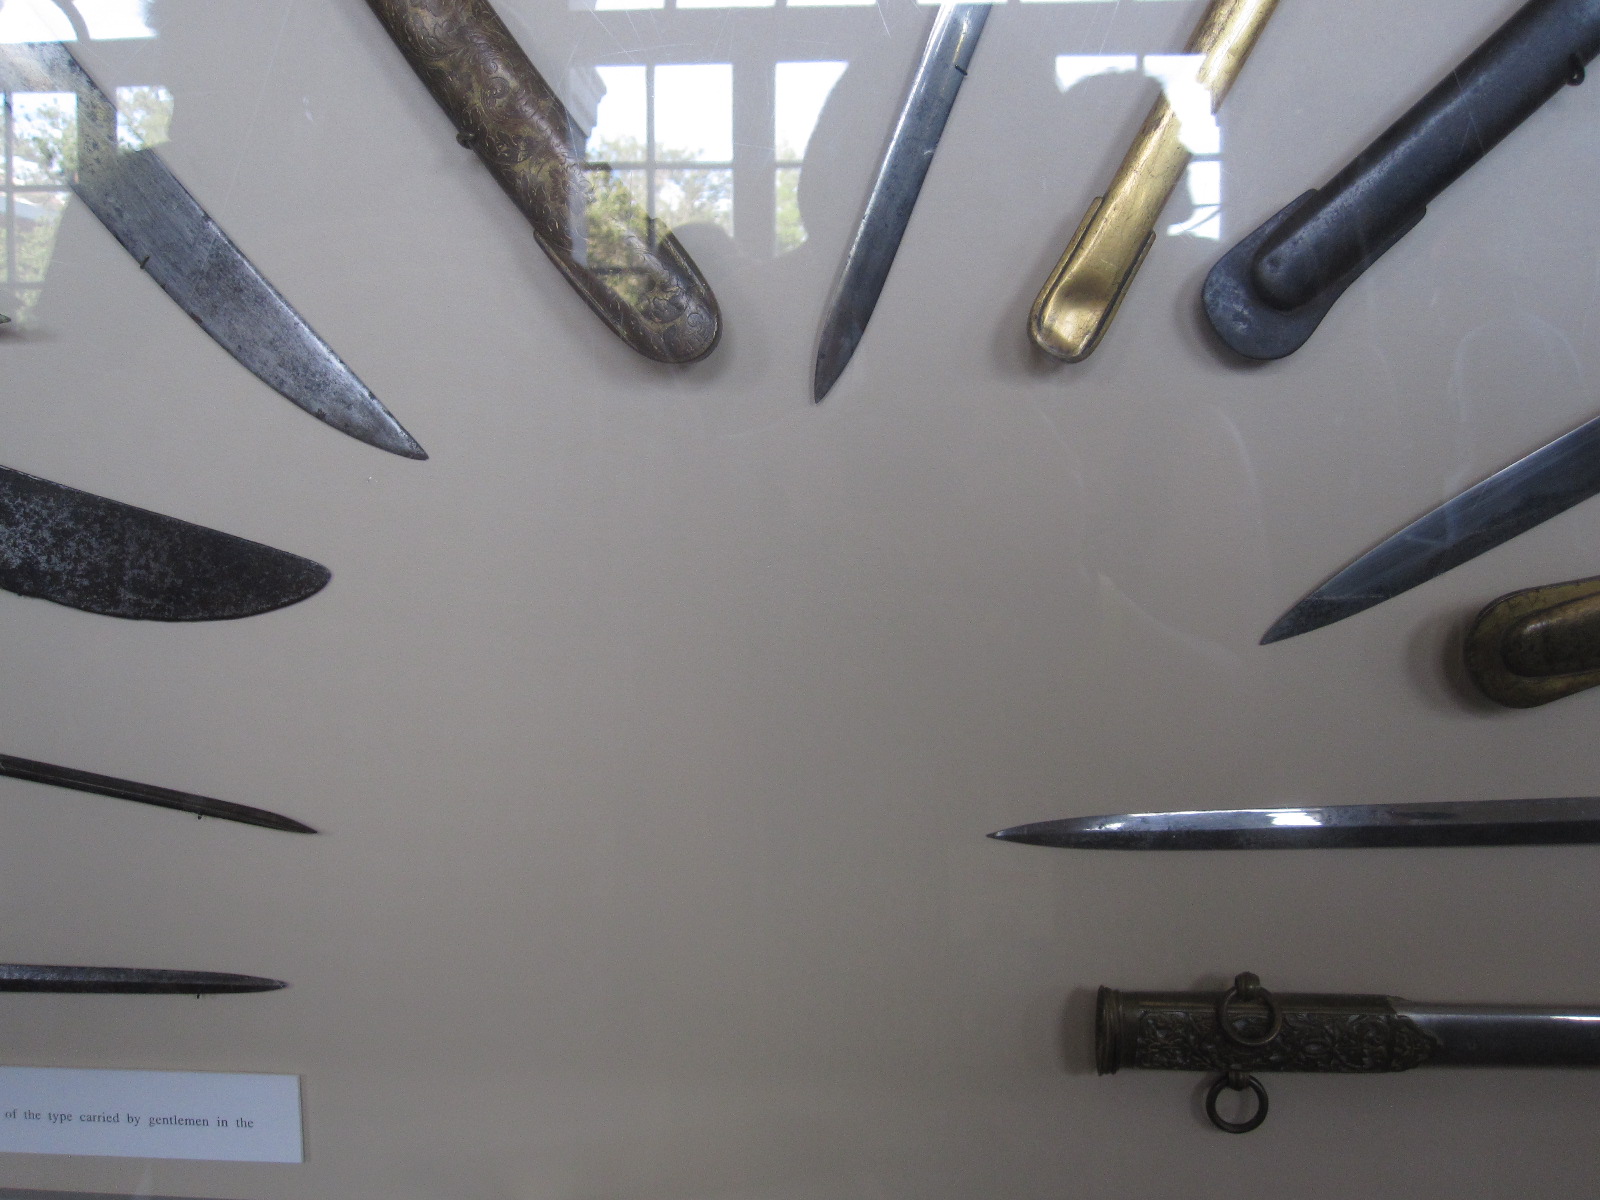 there is a display of different types of knives